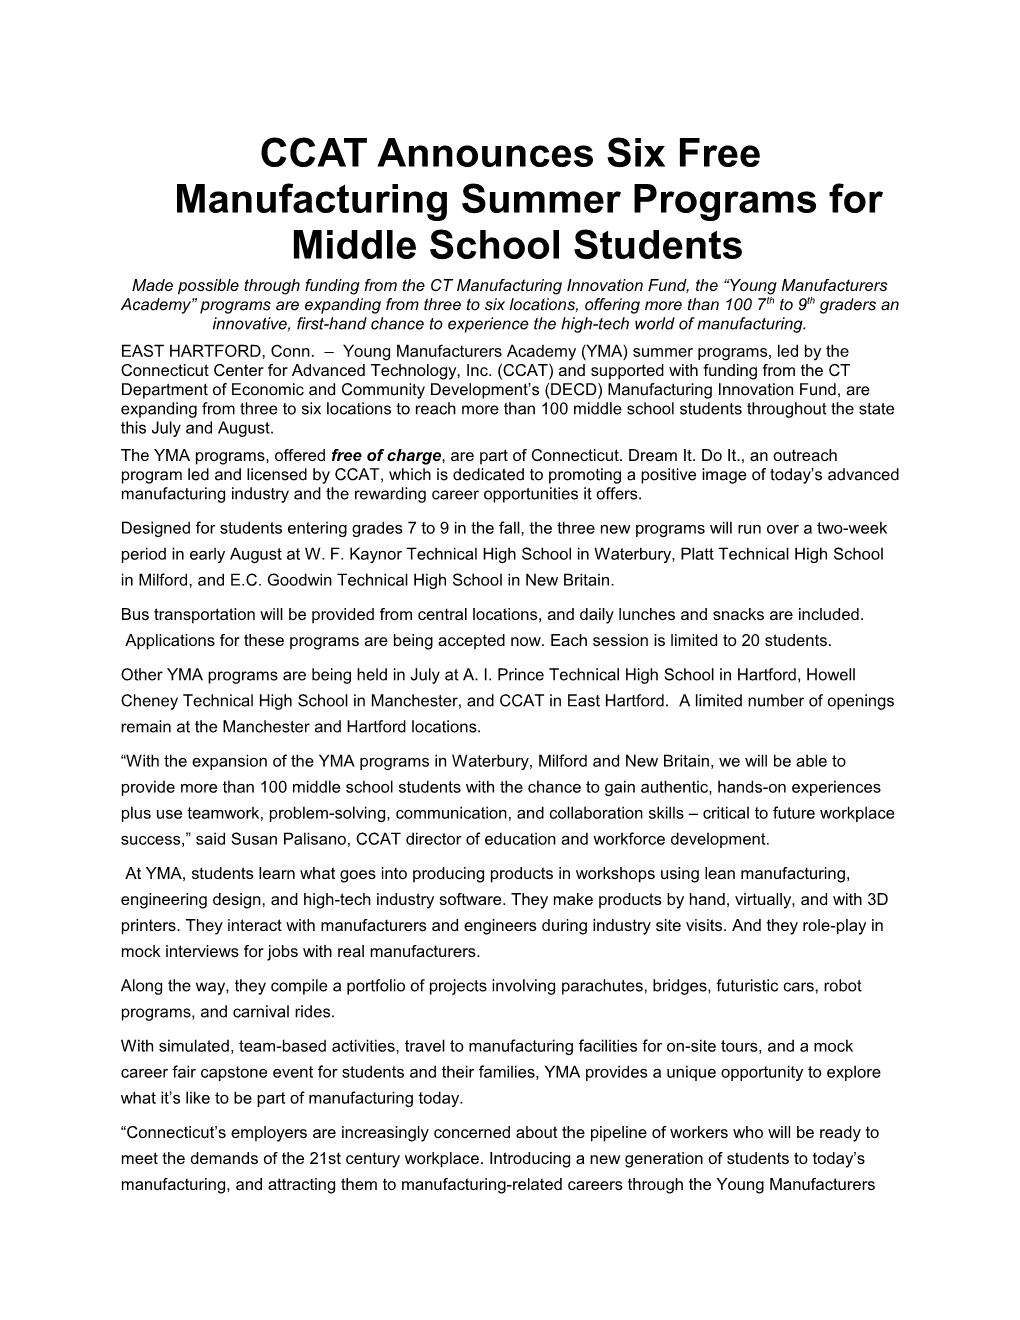 CCAT Announces Six Free Manufacturing Summer Programs for Middle School Students